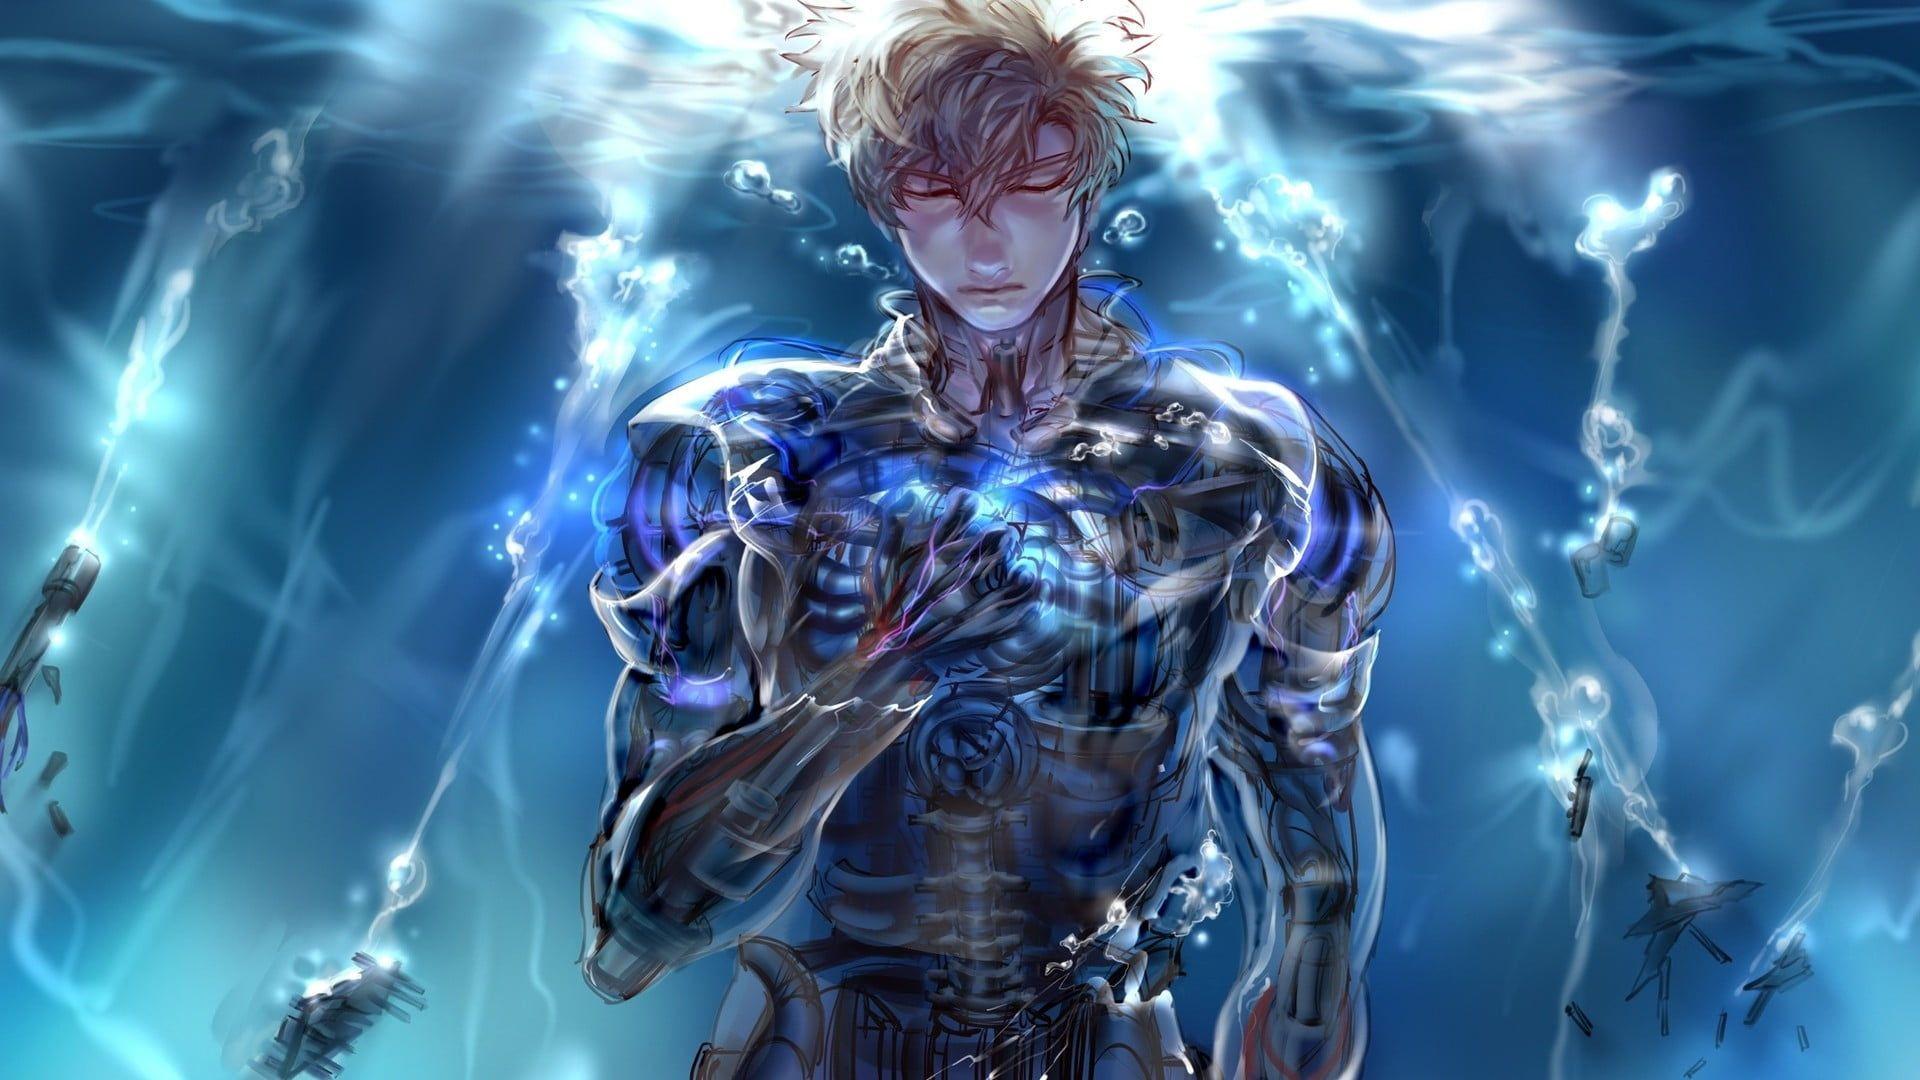 One Punch Man Genos Boy Anime. One punch man anime, One